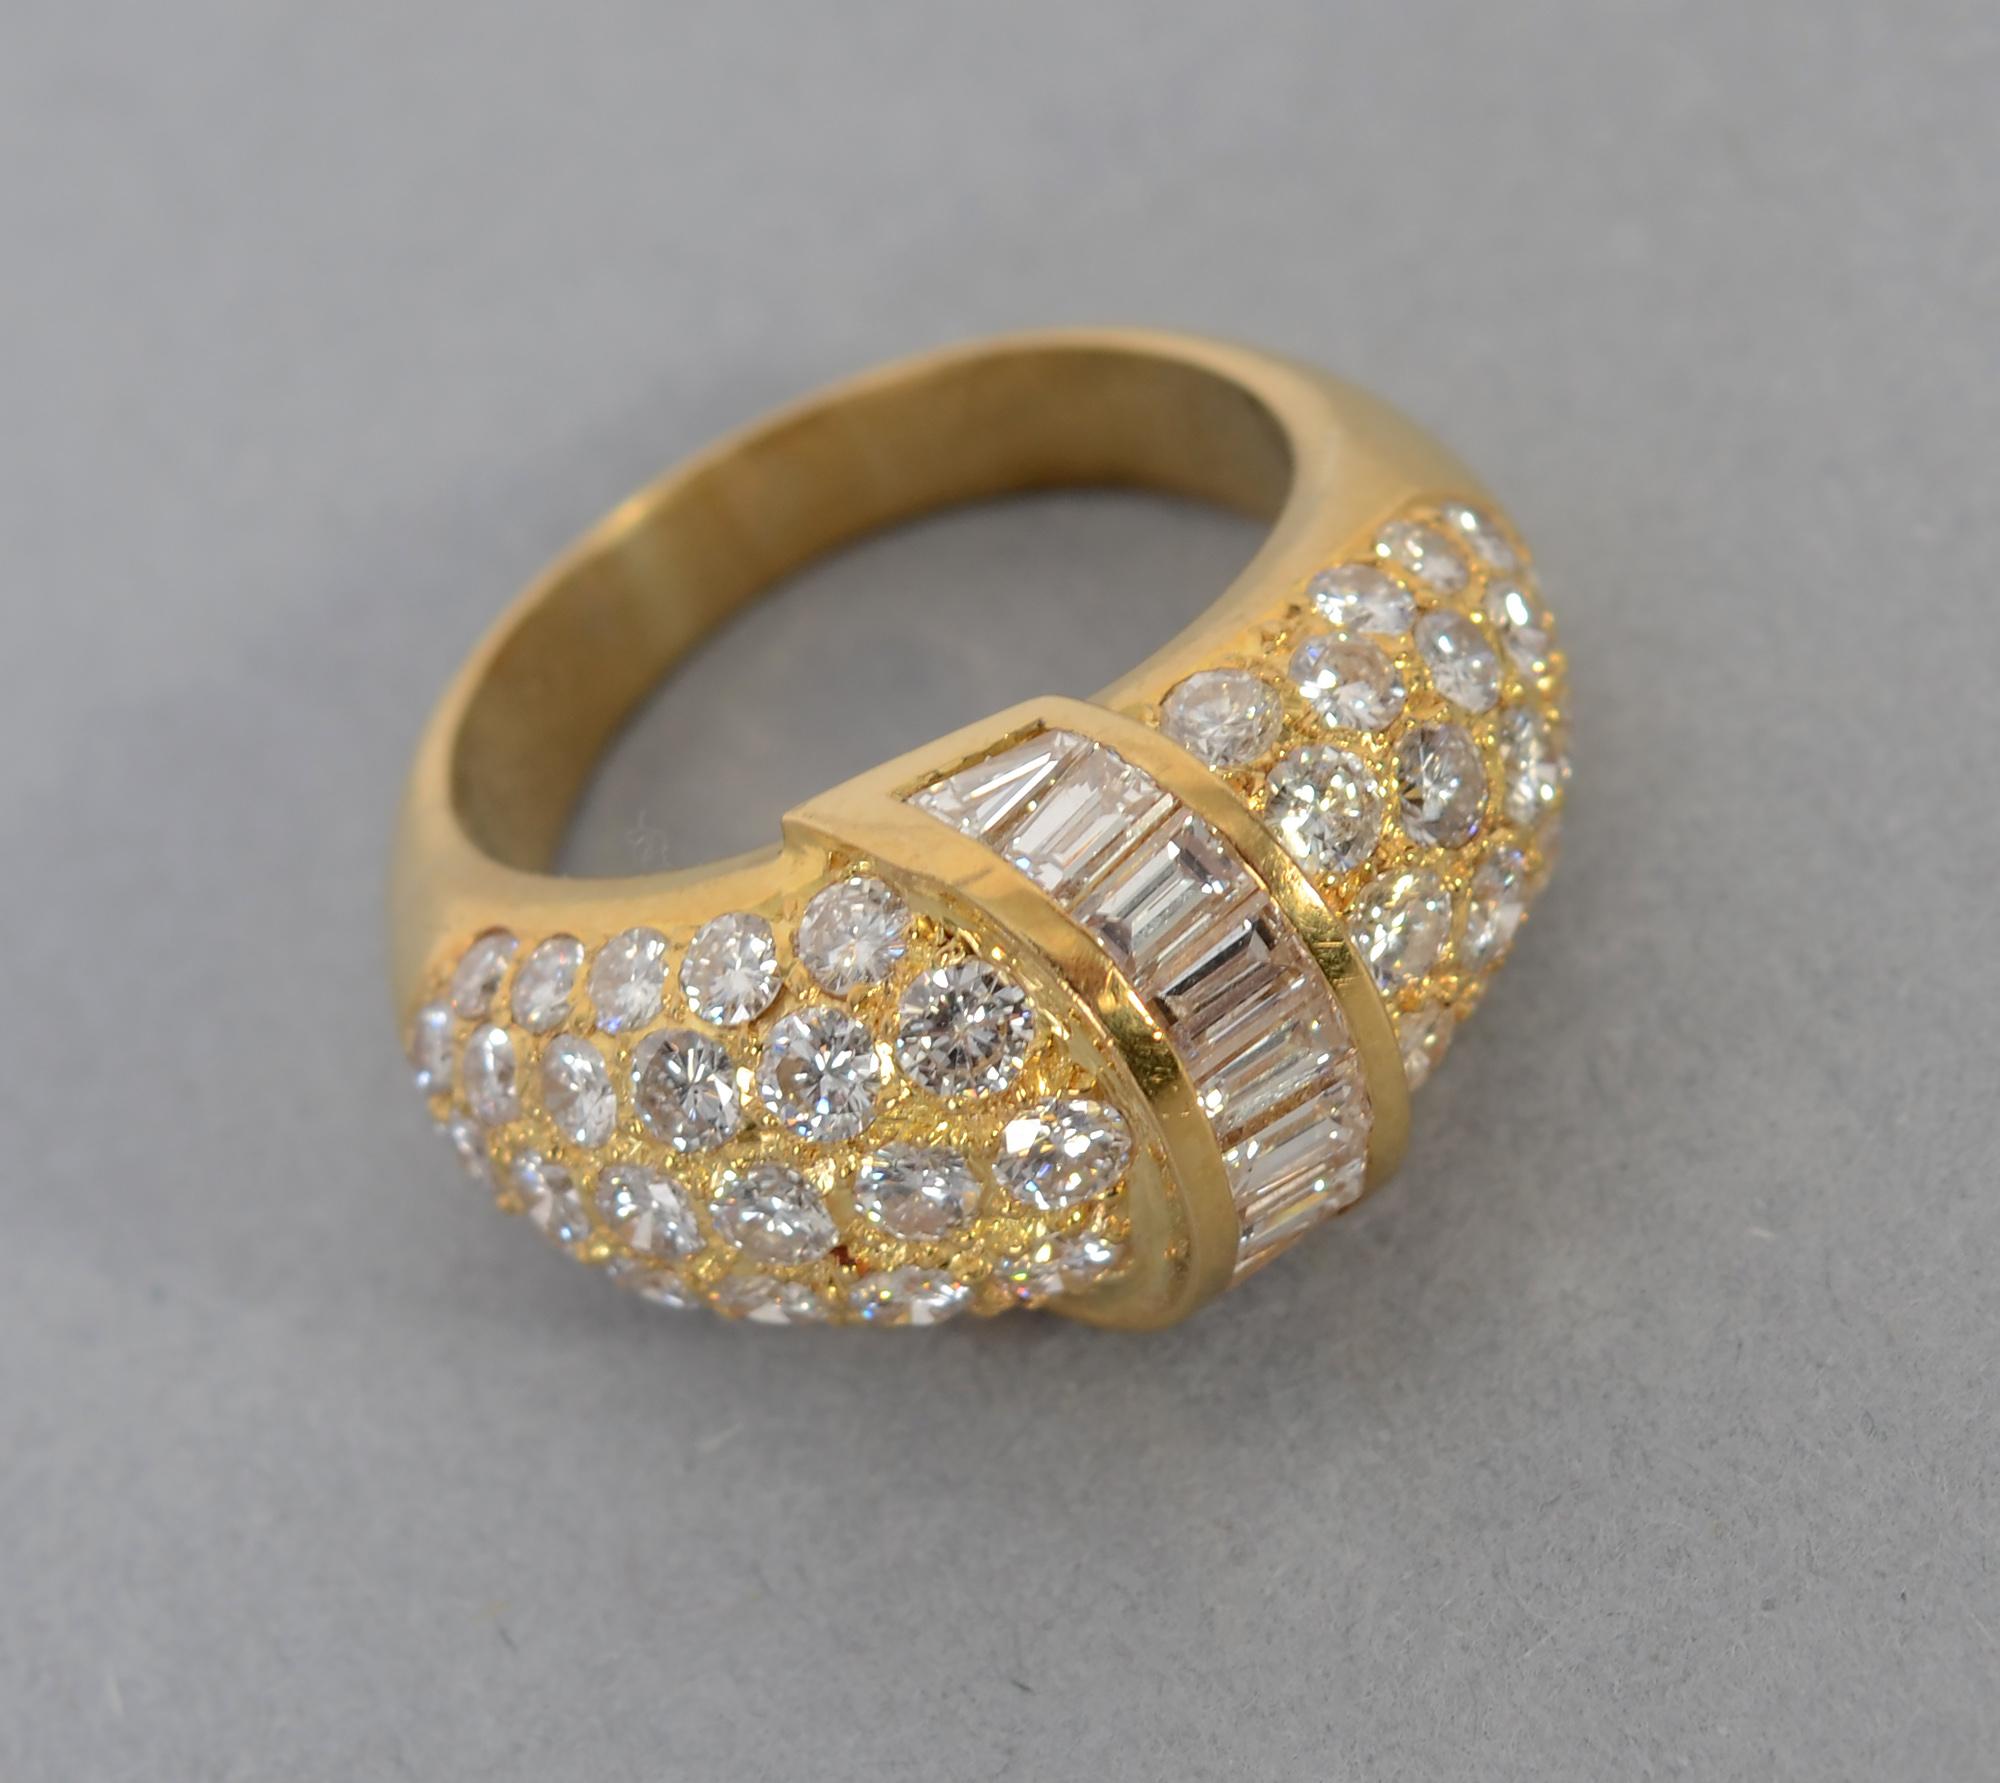 Elegant 18 karat gold cocktail ring with 60 diamonds weighing a total of approximately 3.5 carats. Baguette cut stones overlap a domed band of round brilliants. 
The ring is size 7 3/4 but can easily be sized up or down.